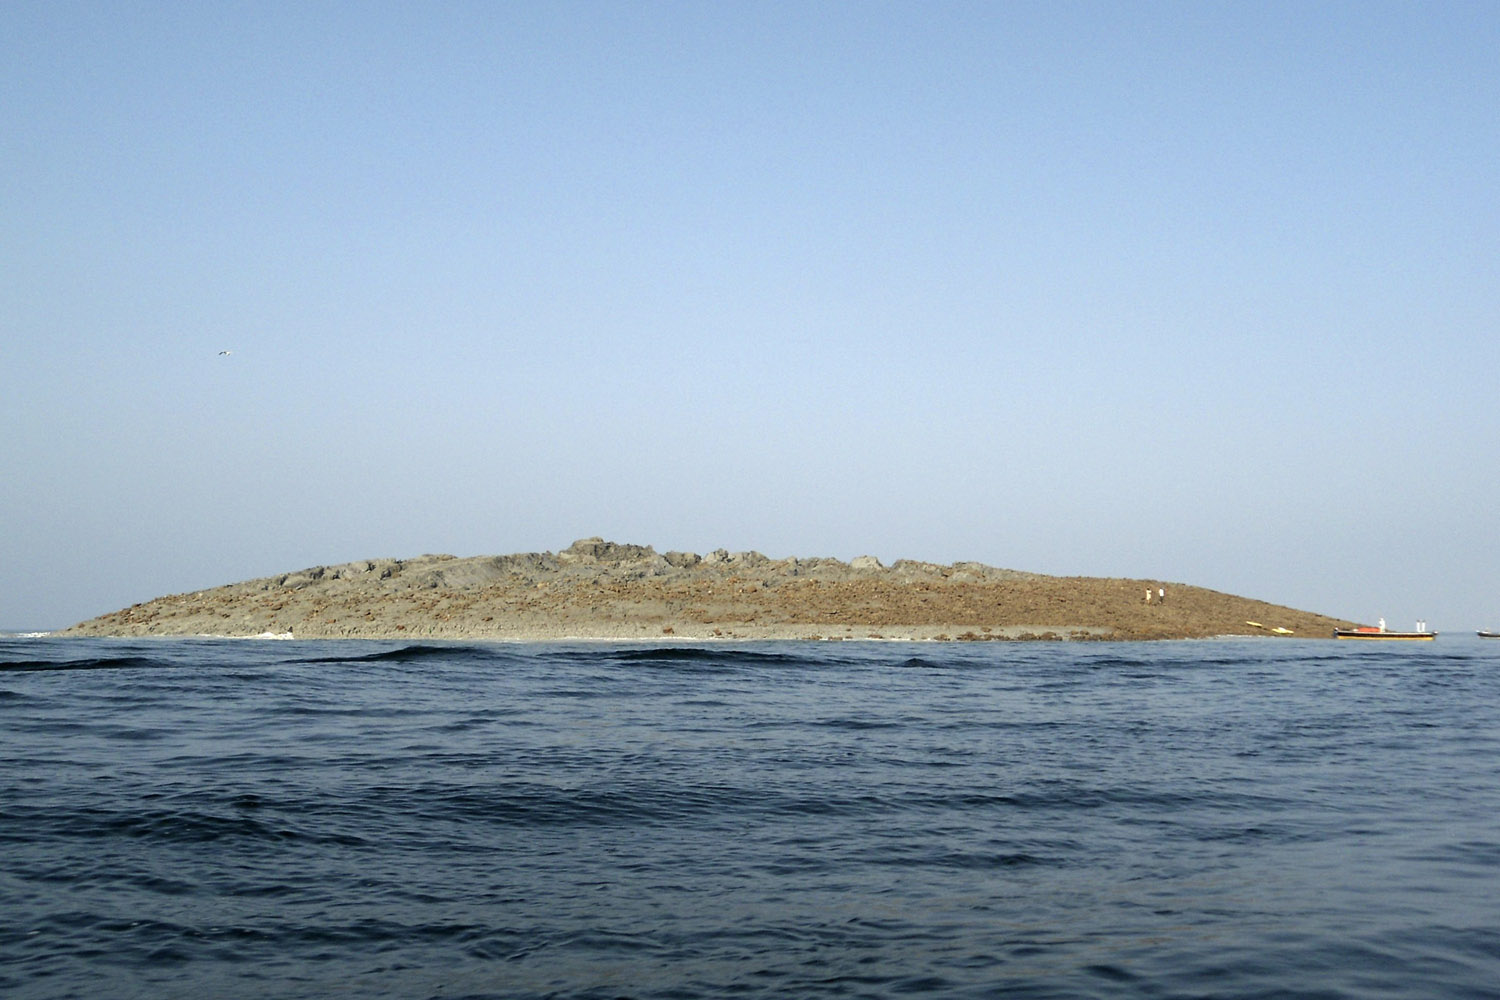 An island that rose from the sea following an earthquake is pictured off Pakistan's Gwadar coastline in the Arabian Sea